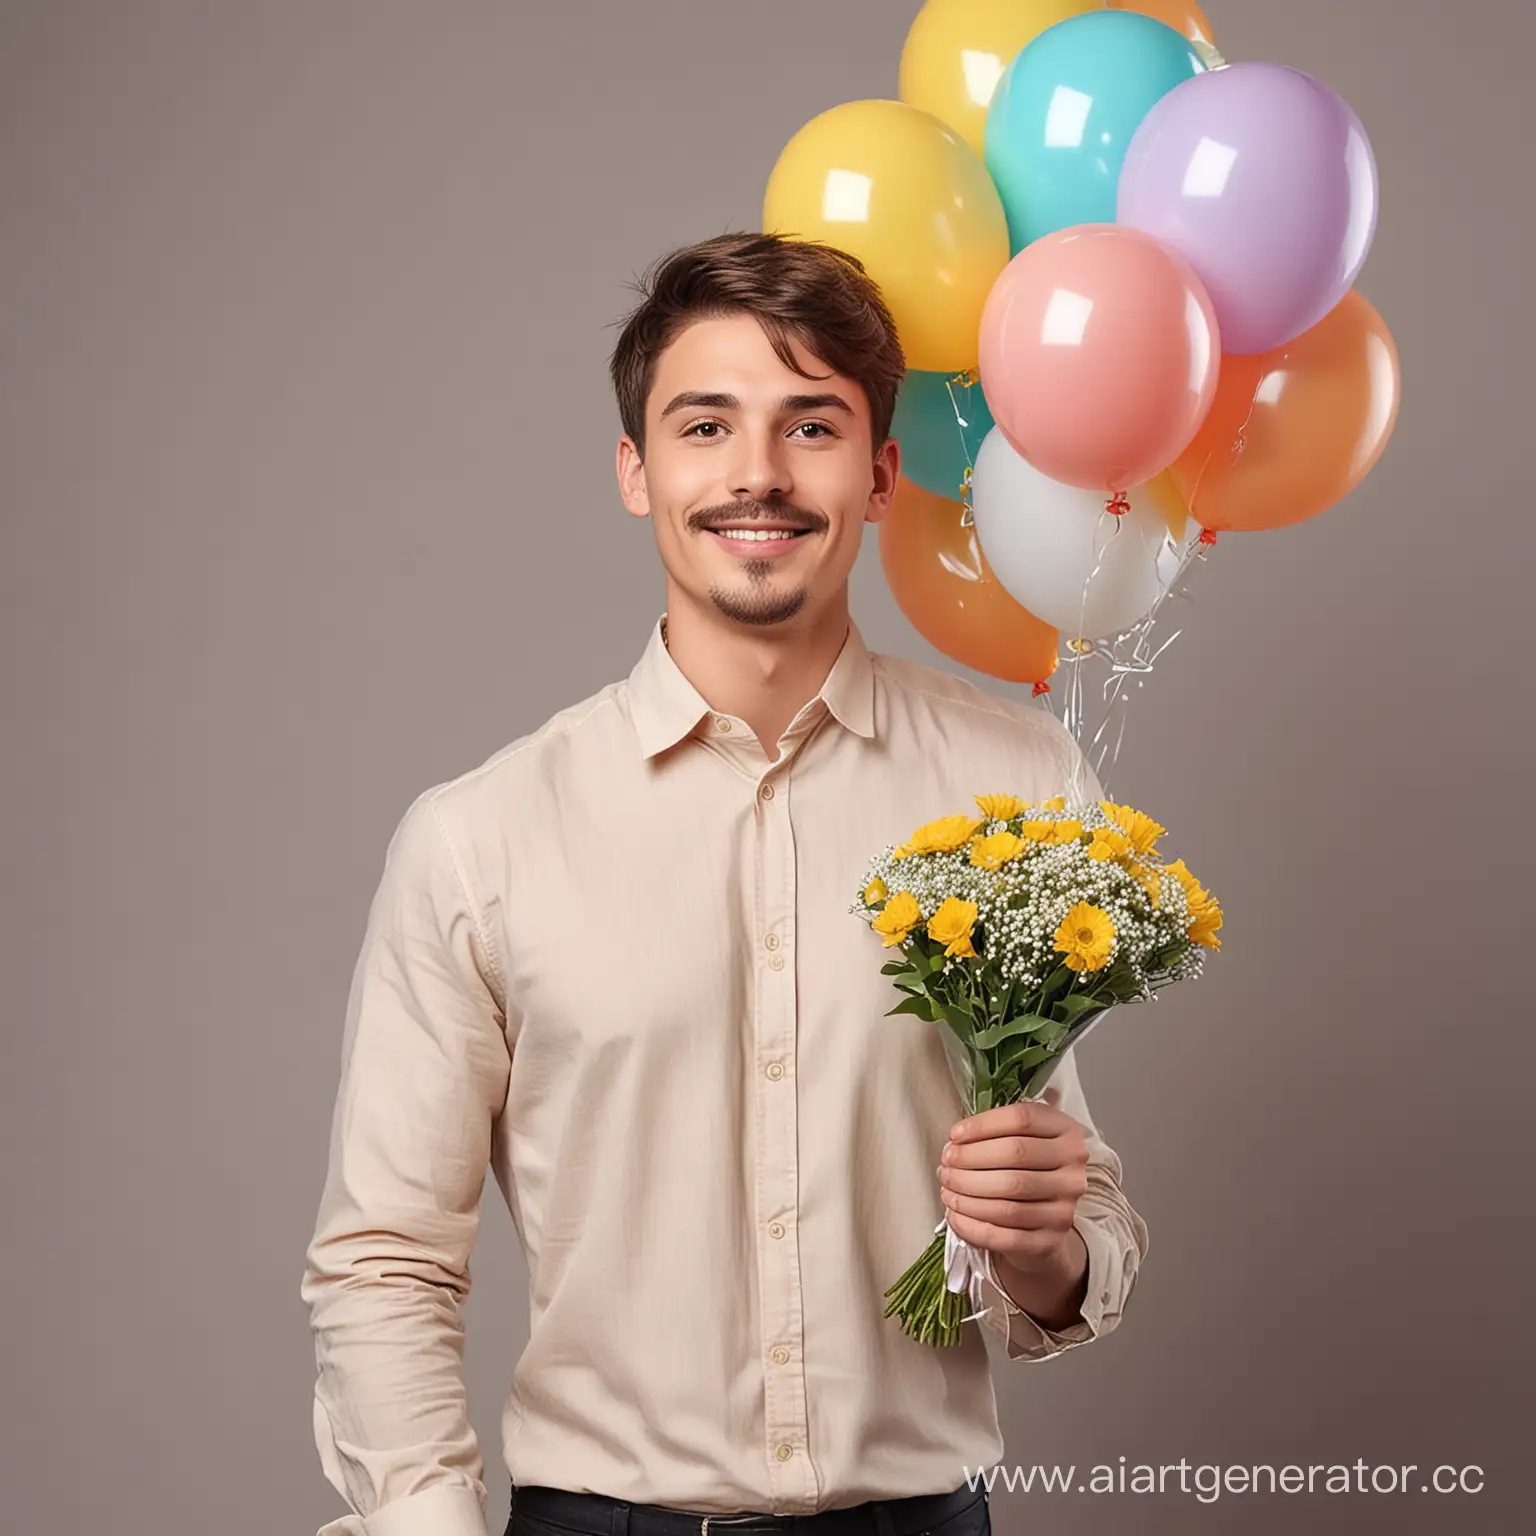 Smiling-Man-with-Balloons-and-Flowers-in-Flight